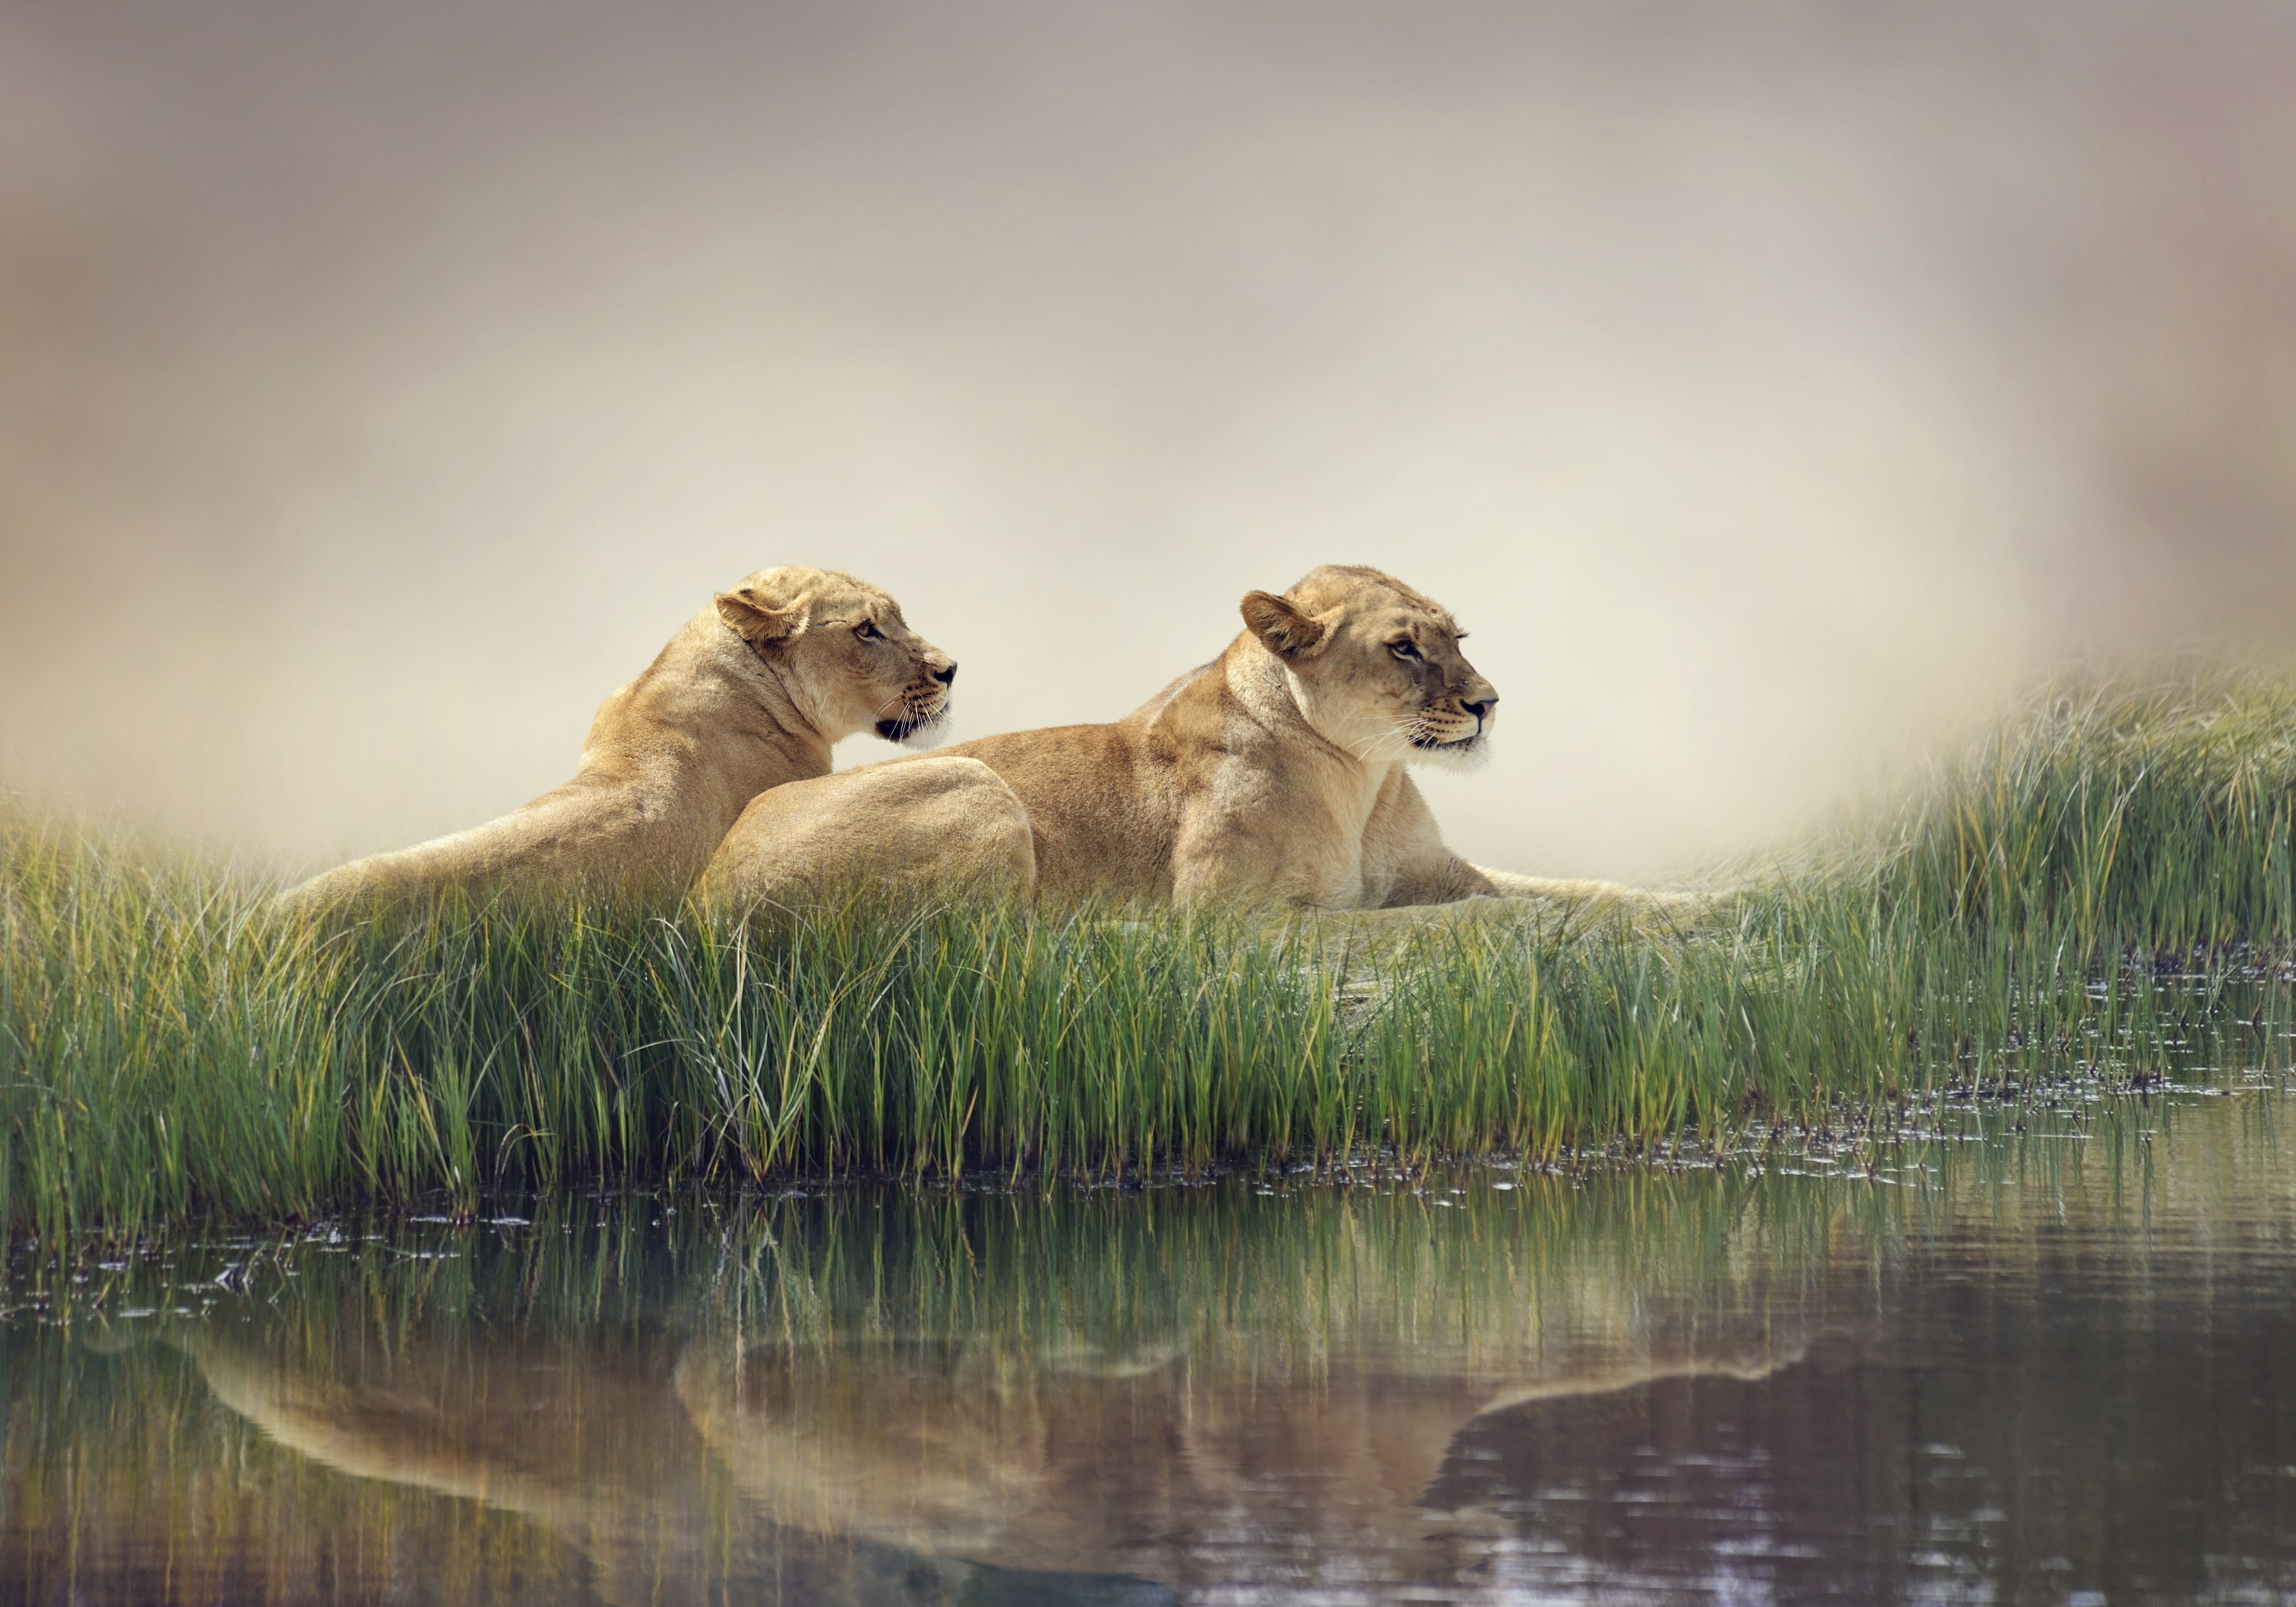 big, Cats, Lions, Pond, Two, Grass, Animals, Wallpapers Wallpaper